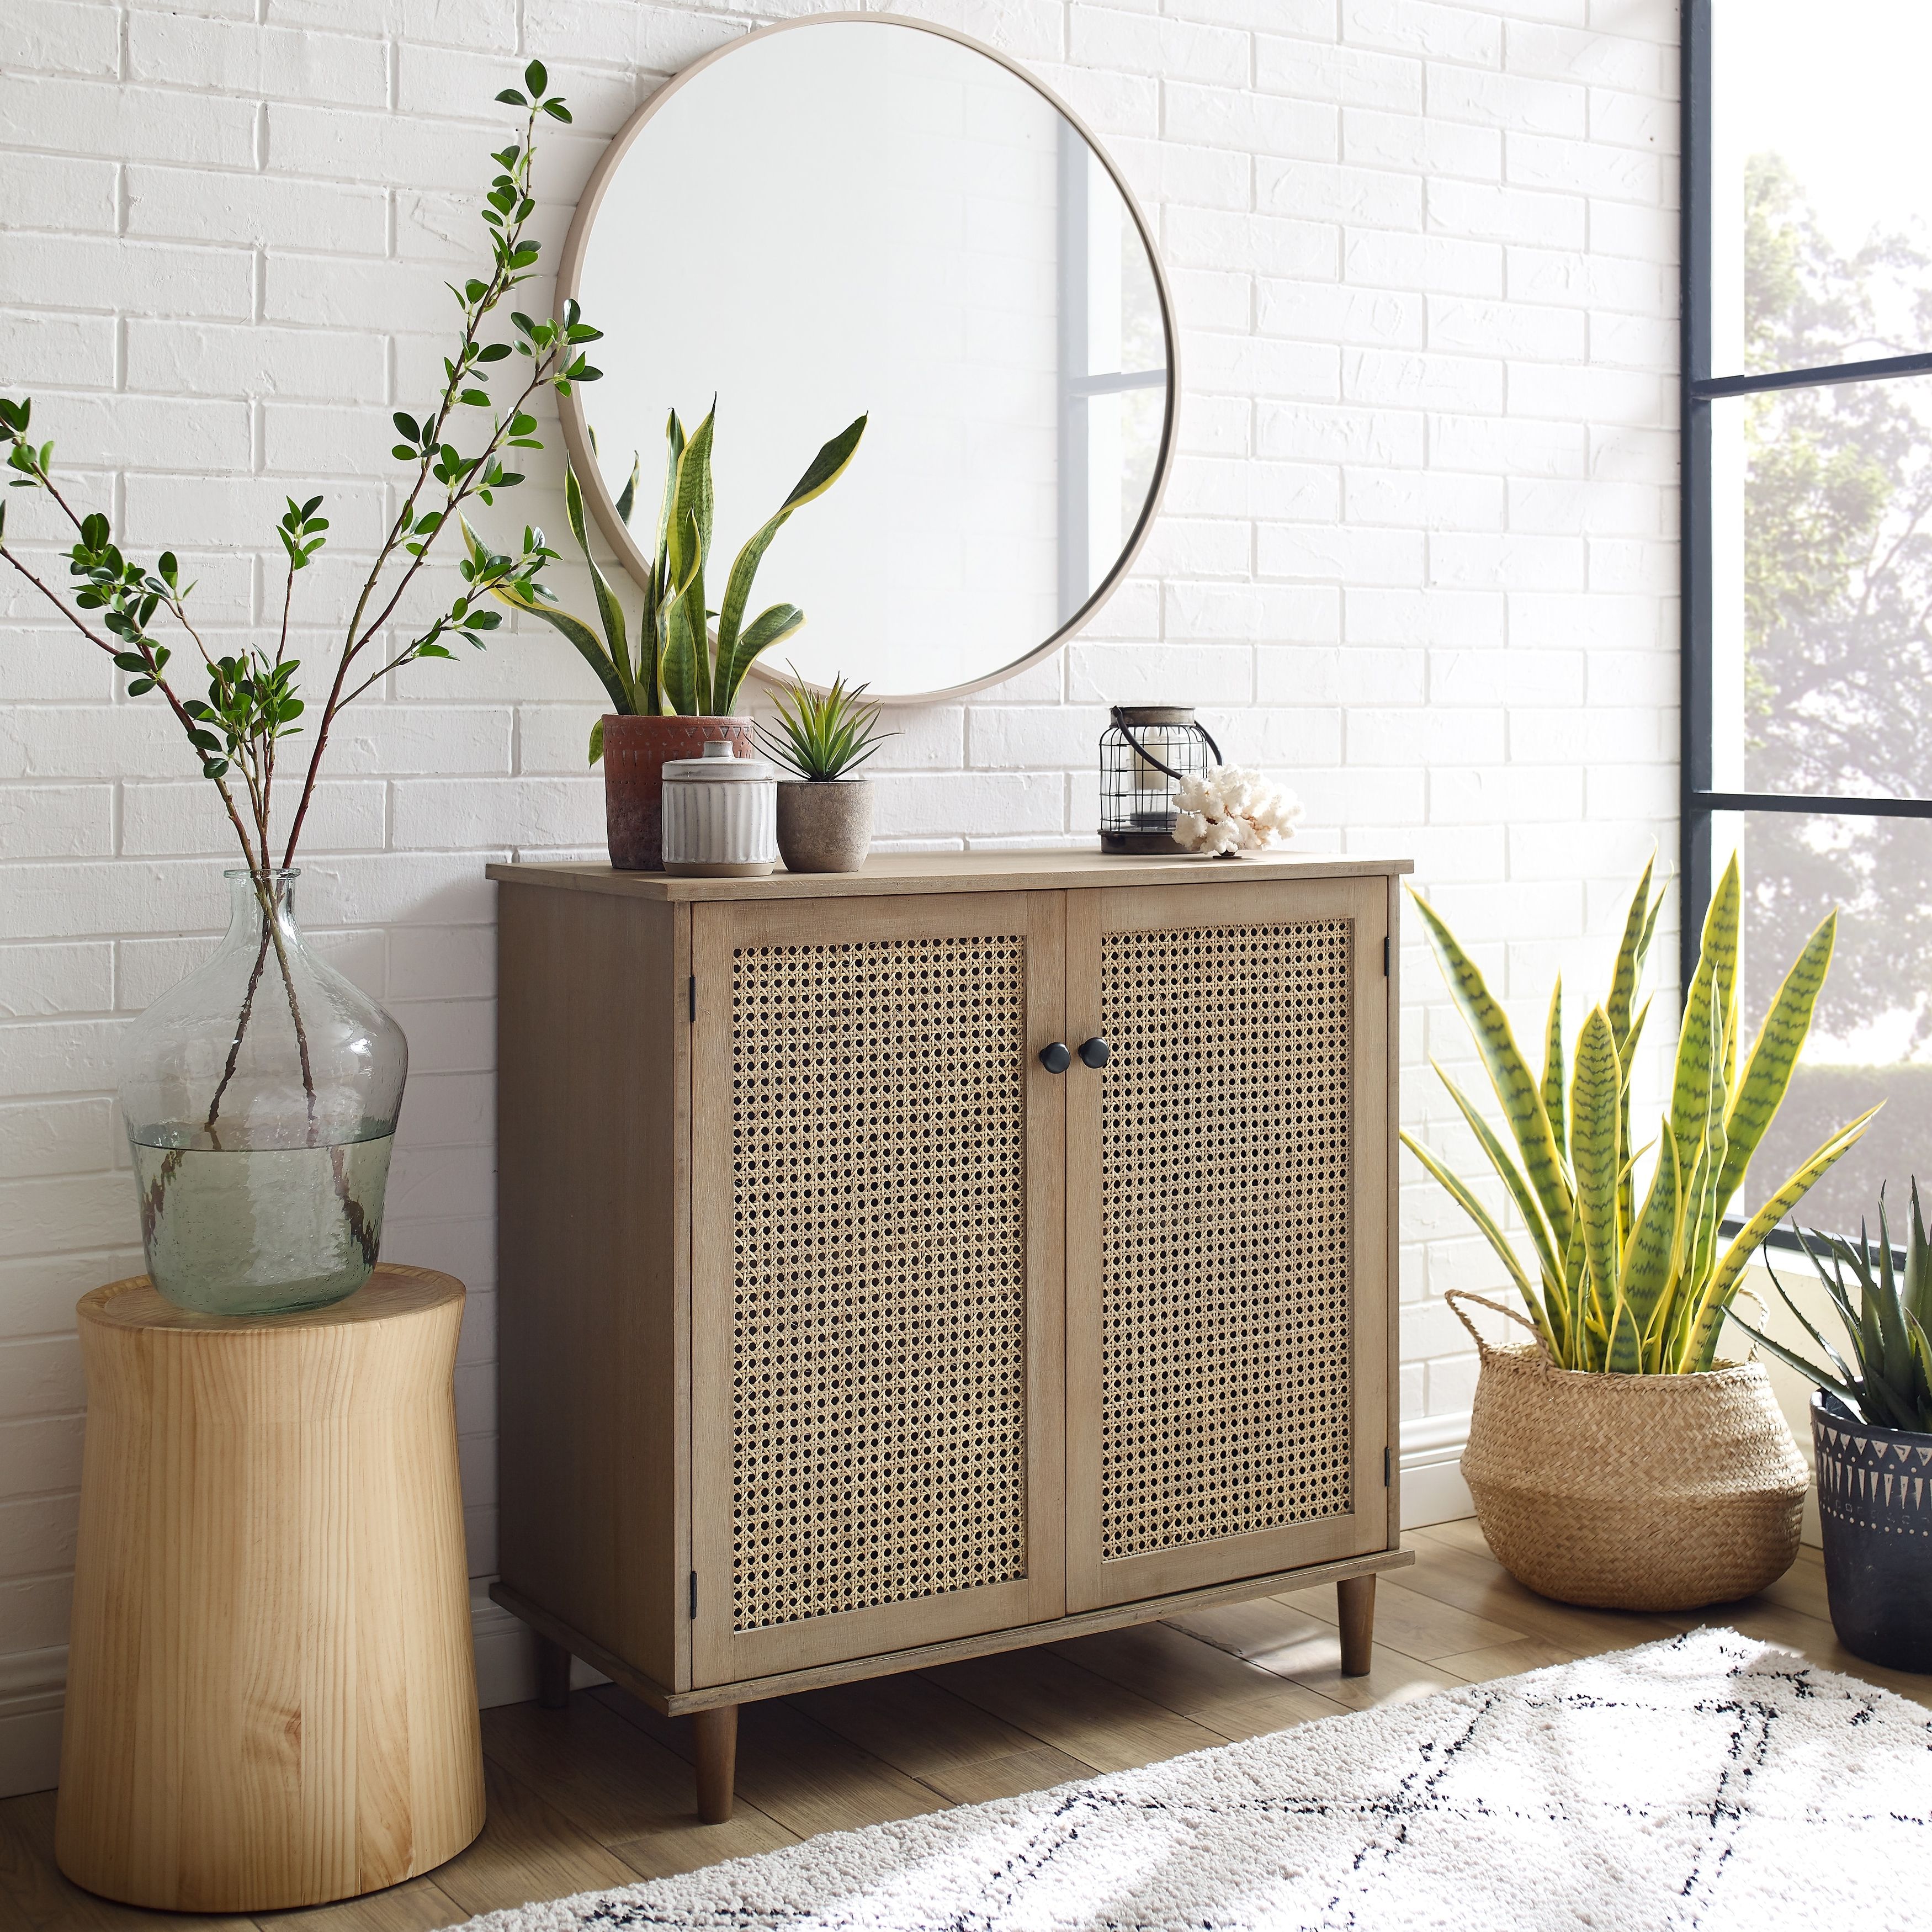 Art Leon Woven Rattan Wicker Doors Accent Cabinet Sideboard – Bed Bath &  Beyond – 31979554 Within Sideboards Accent Cabinet (View 9 of 20)